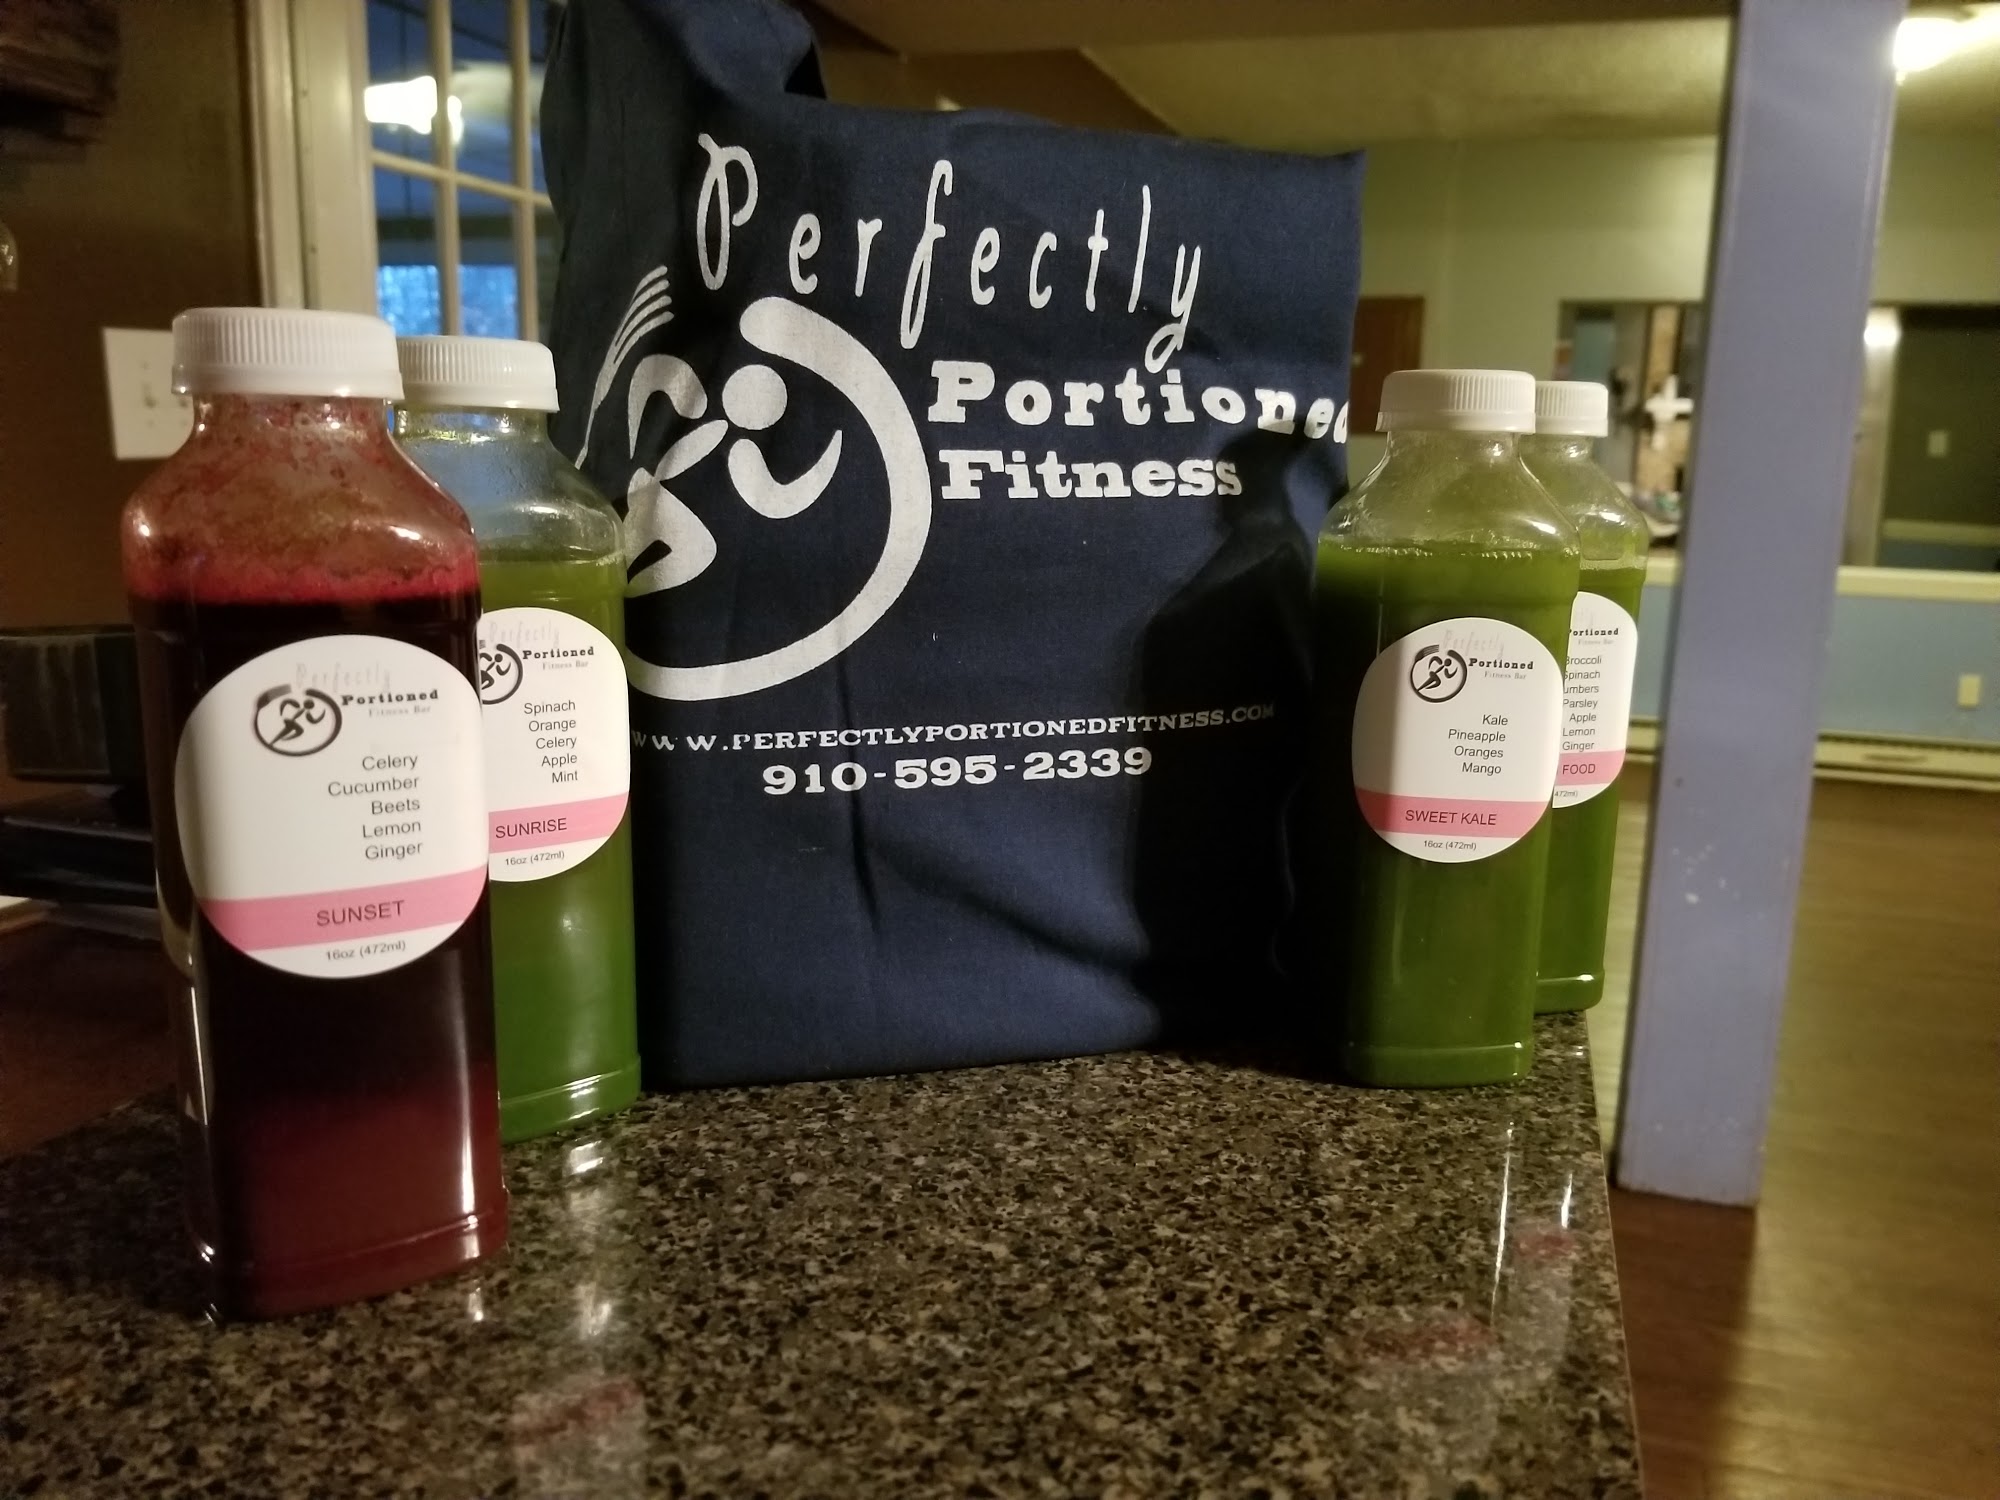 Perfectly Portioned Fitness